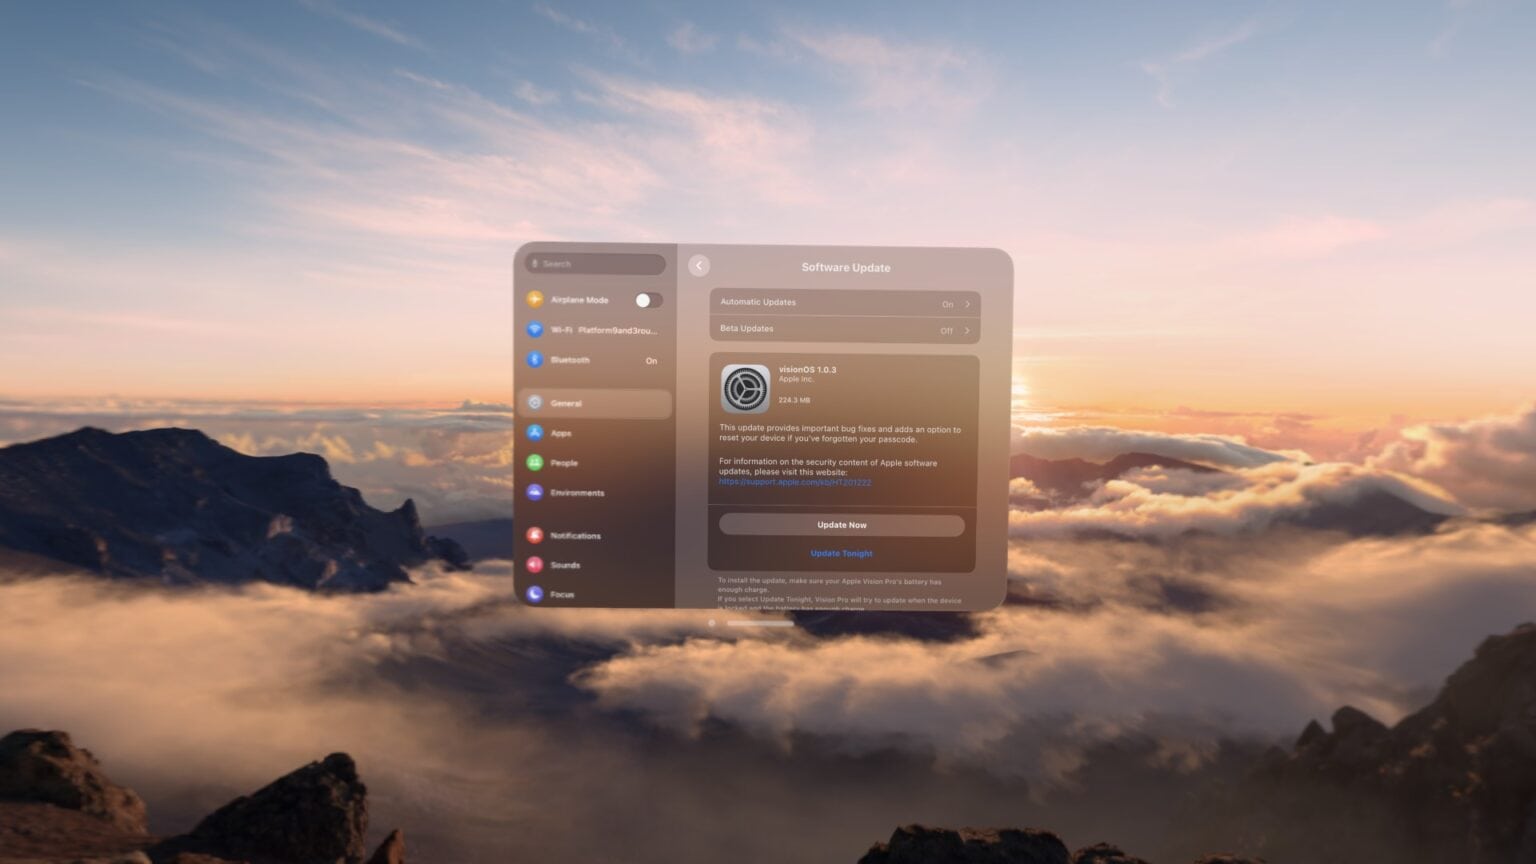 Vision Pro software update screen in a mountaintop environment